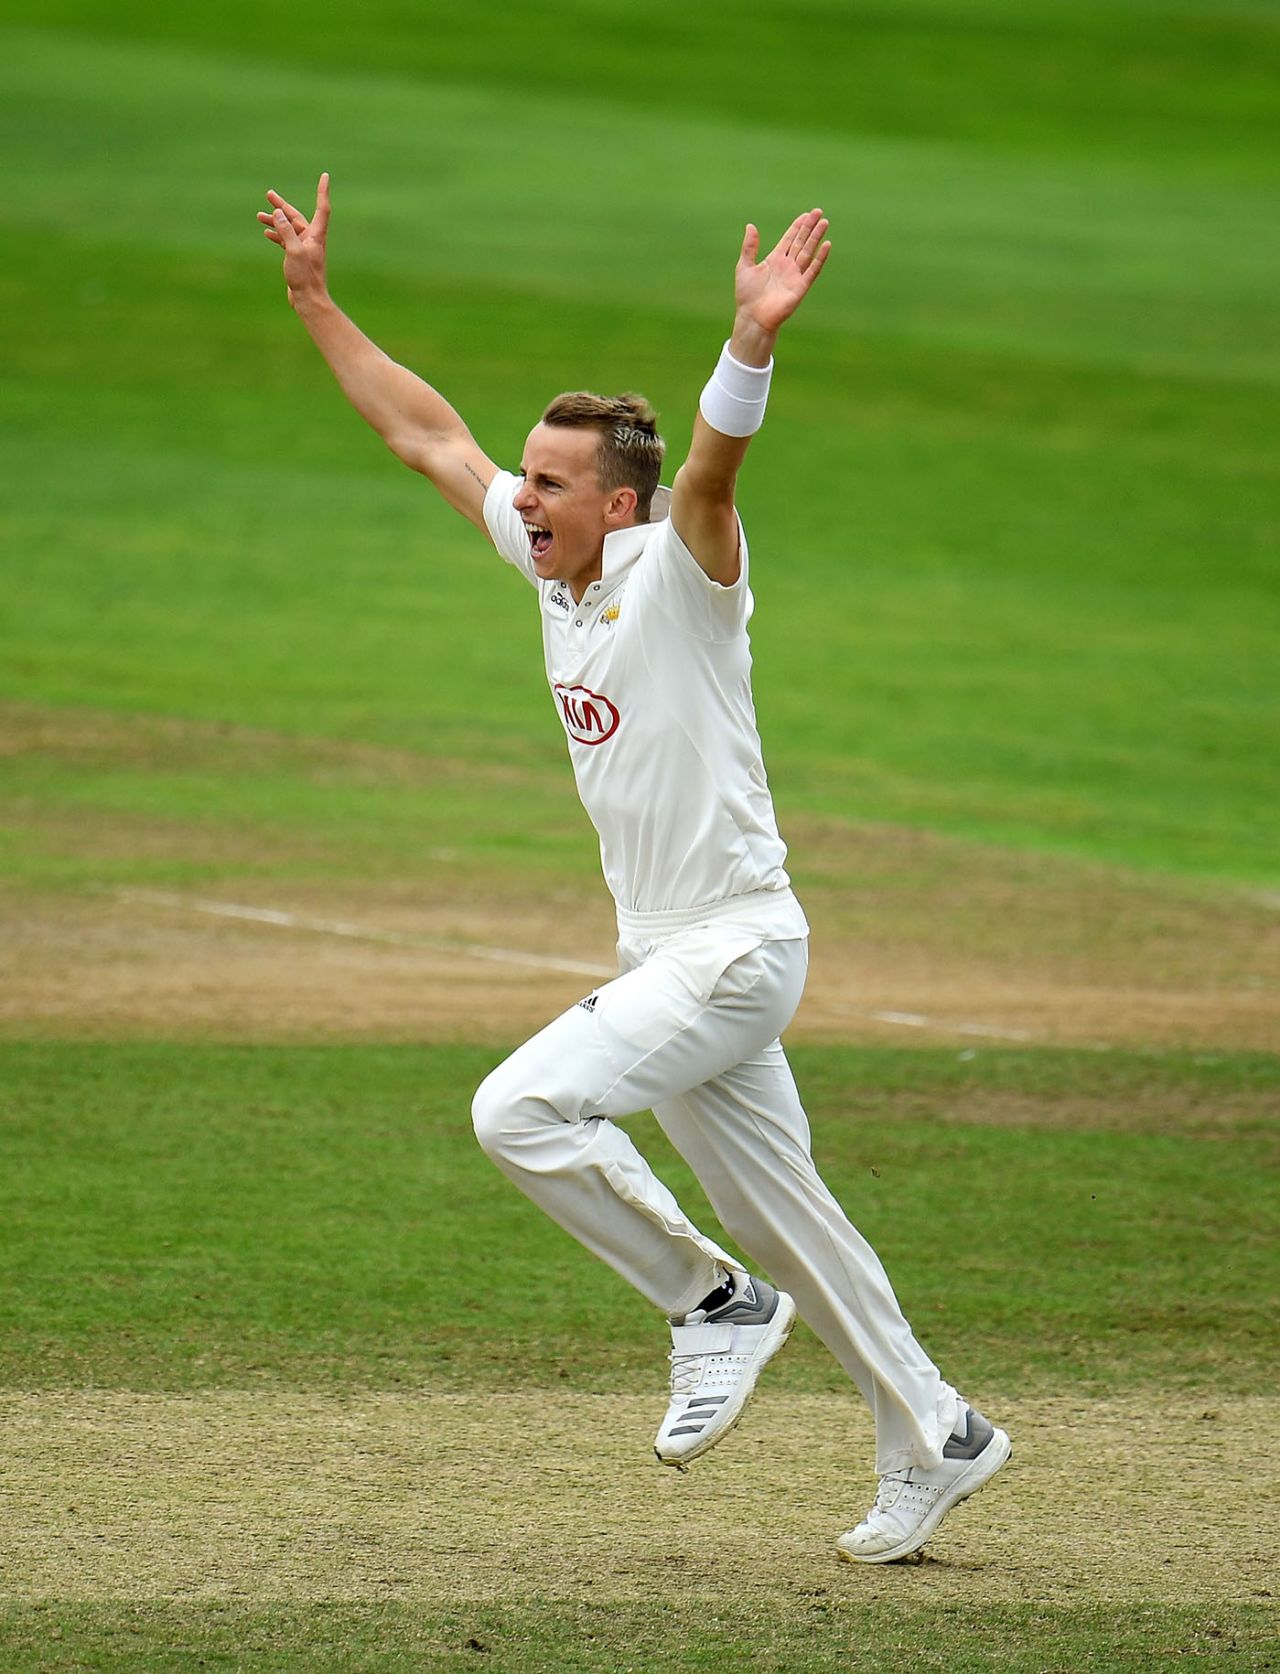 Tom Curran claims another wicket for Surrey, Somerset v Surrey, Taunton, 3rd day, September 20, 2018